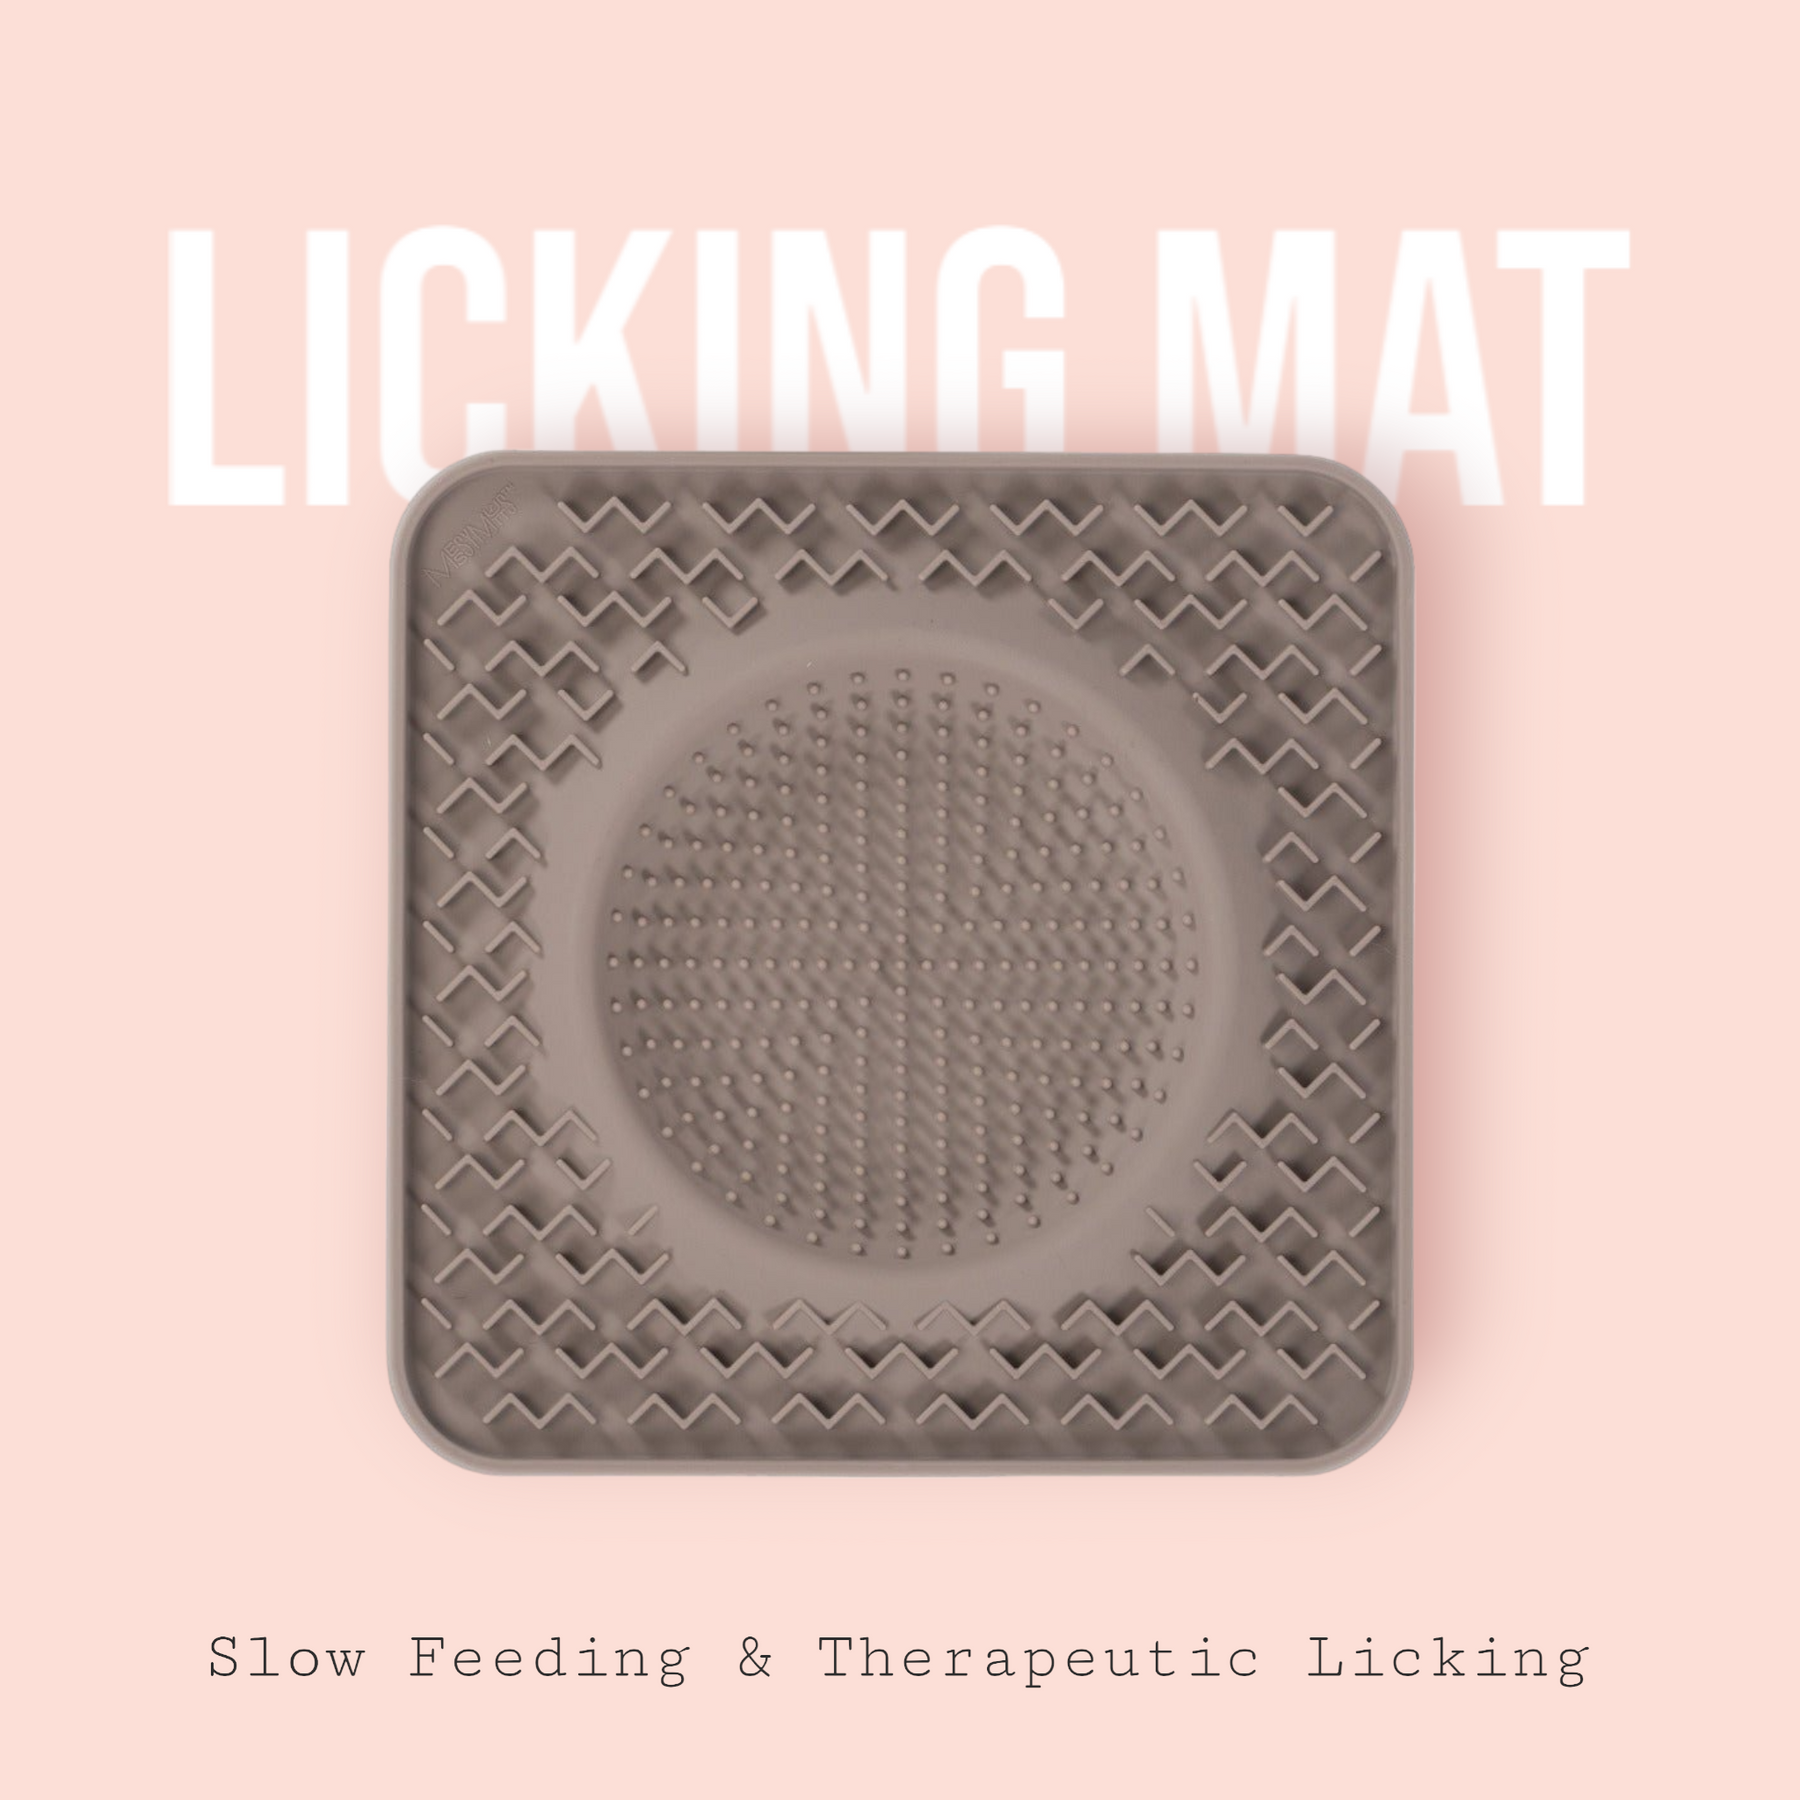 Messy Mutts Silicon Therapeutic Licking Bowl Mat in Grey: Slow Feeding & Therapeutic Licking for Your Dog